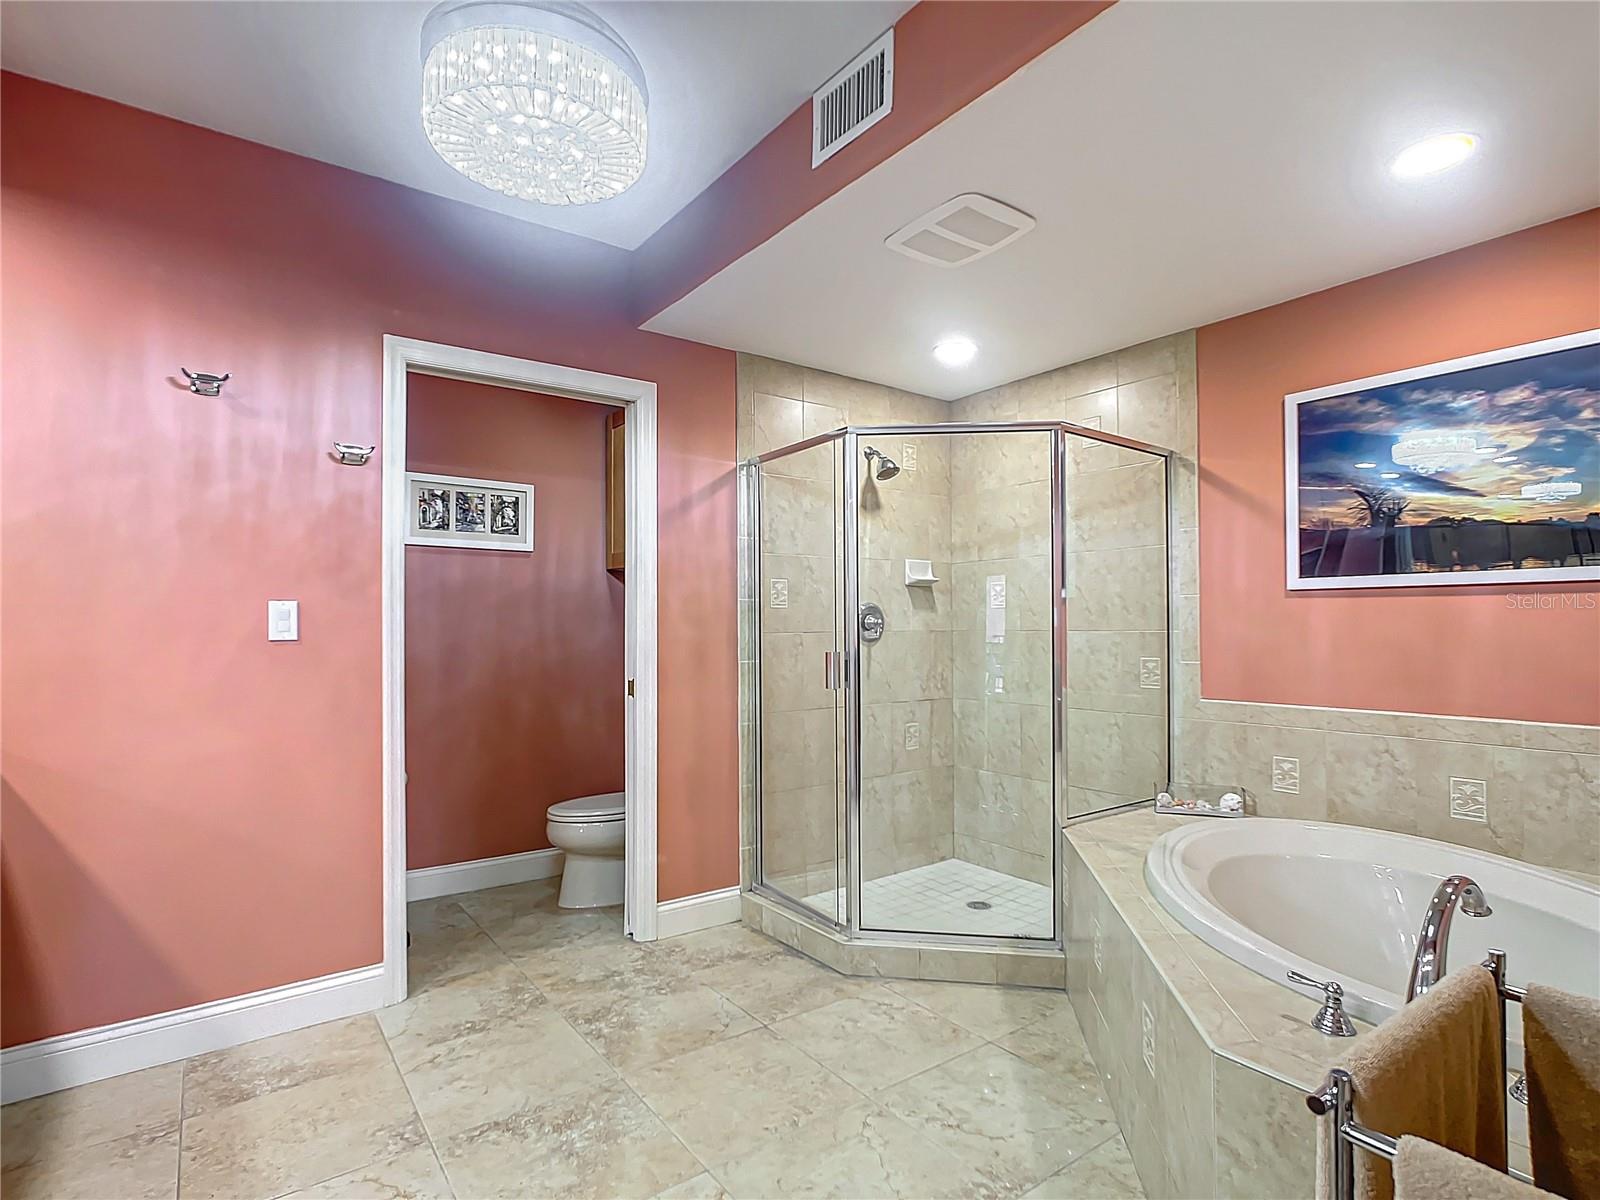 Notice that the primary bathroom has a separate water closet plus a separate shower & bathtub